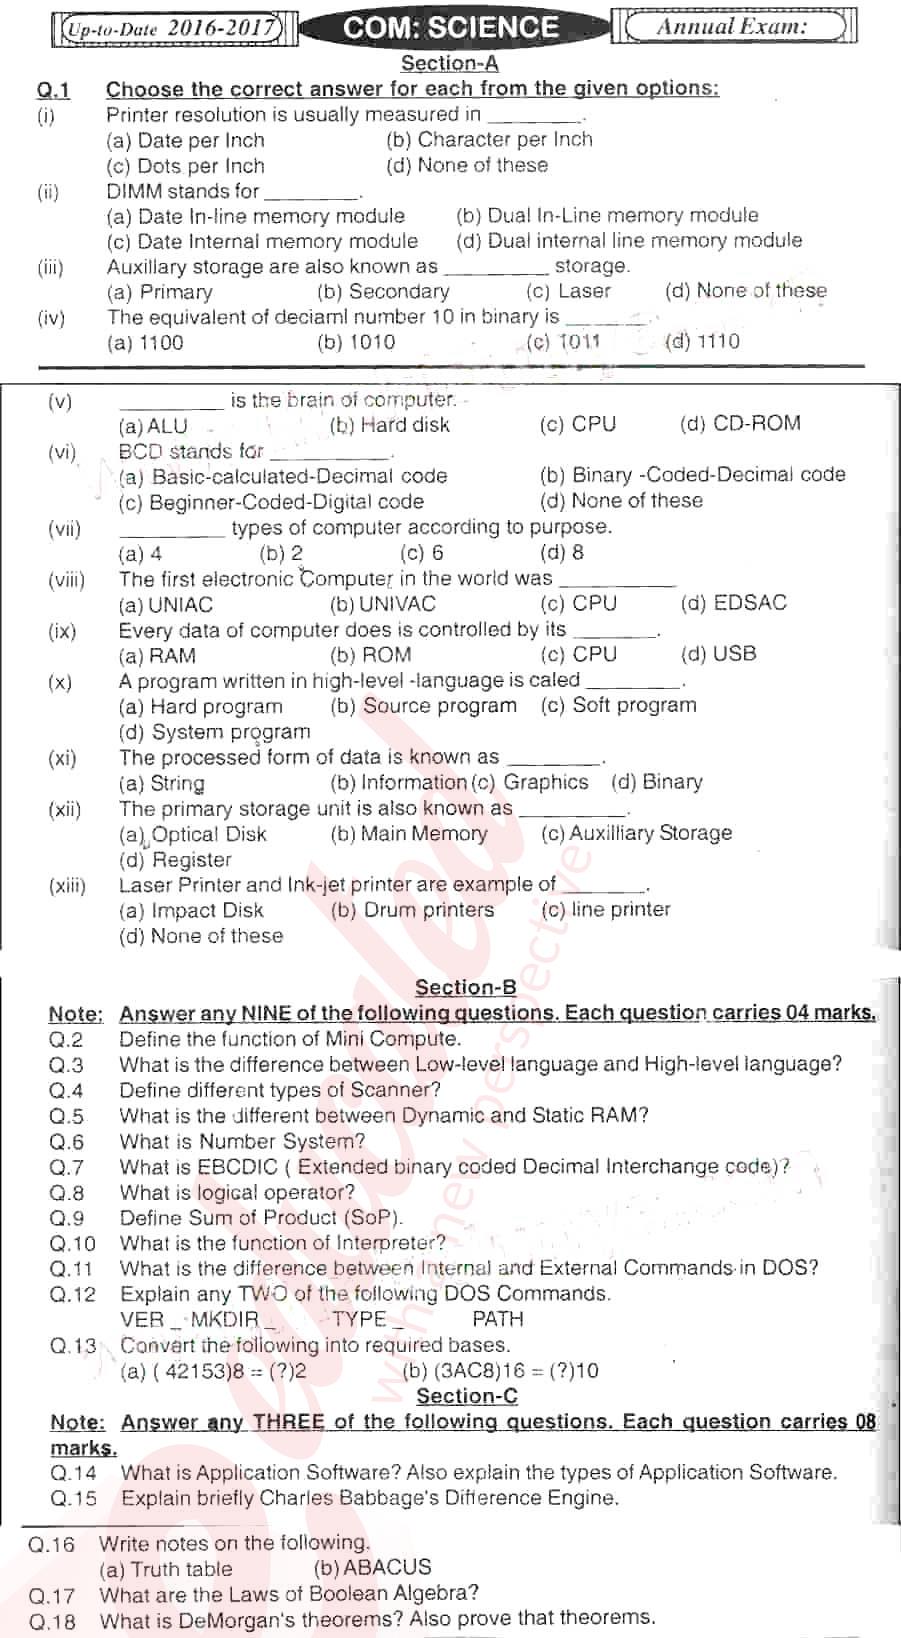 Computer Science 9th English Medium Past Paper Group 1 BISE Hyderabad 2016